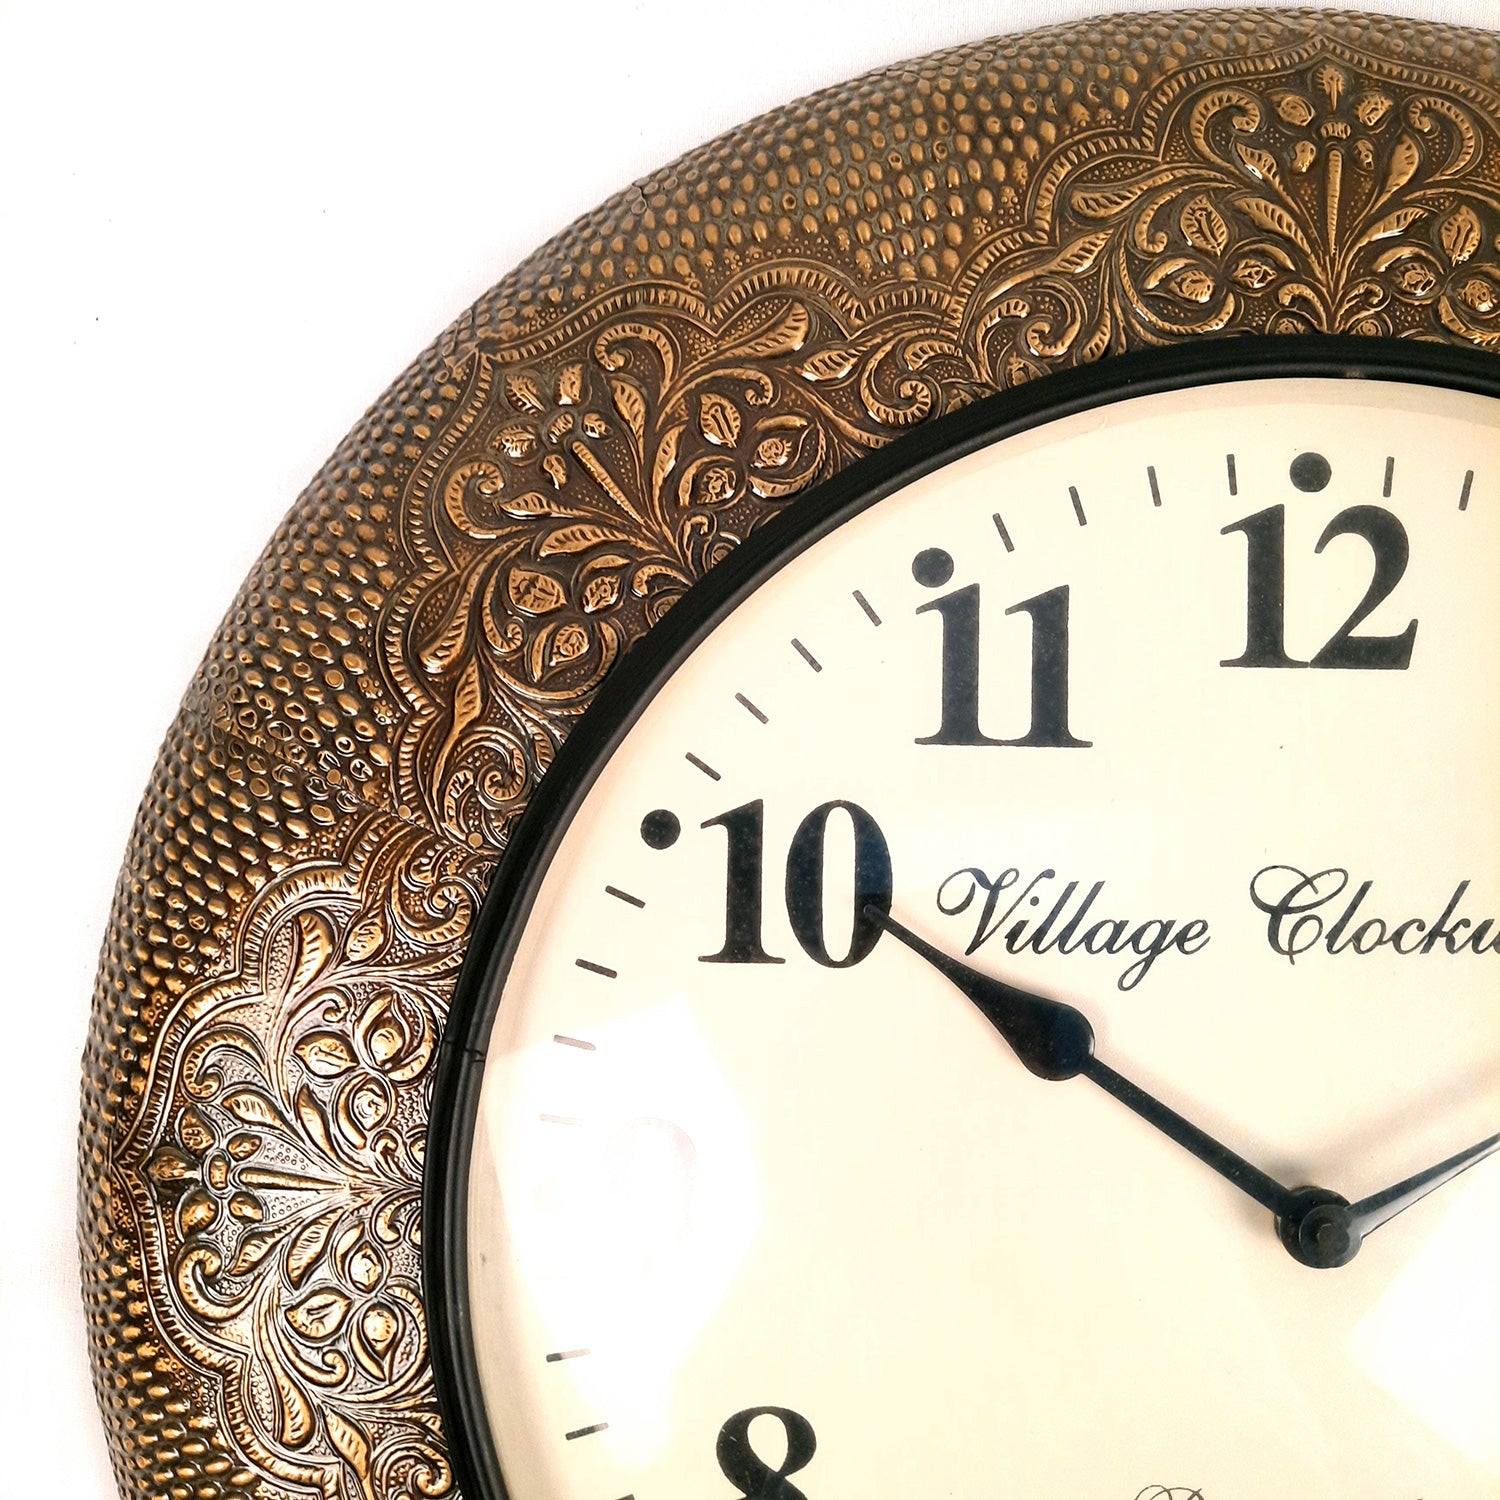 Wall Clock | Antique Clock Wall Mount With Wood & Brass Finish - For Home, Living Room, Bedroom, Office & Hall Decoration | Wedding & Housewarming Gift - 18 Inch - Apkamart